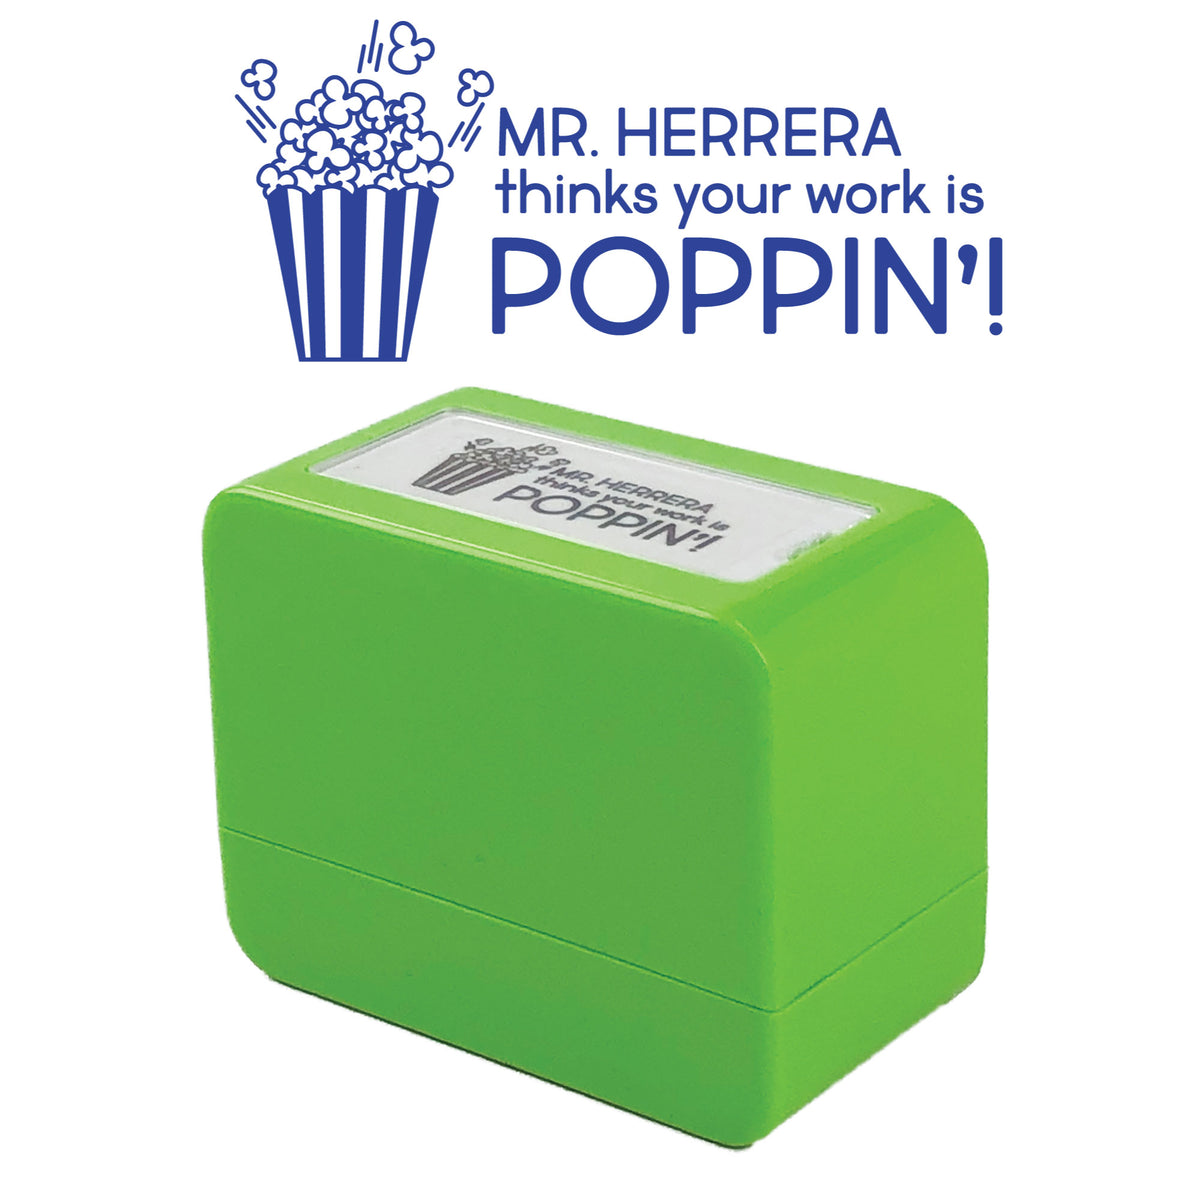 TEACHER STAMP -- YOUR WORK IS POPPIN'!